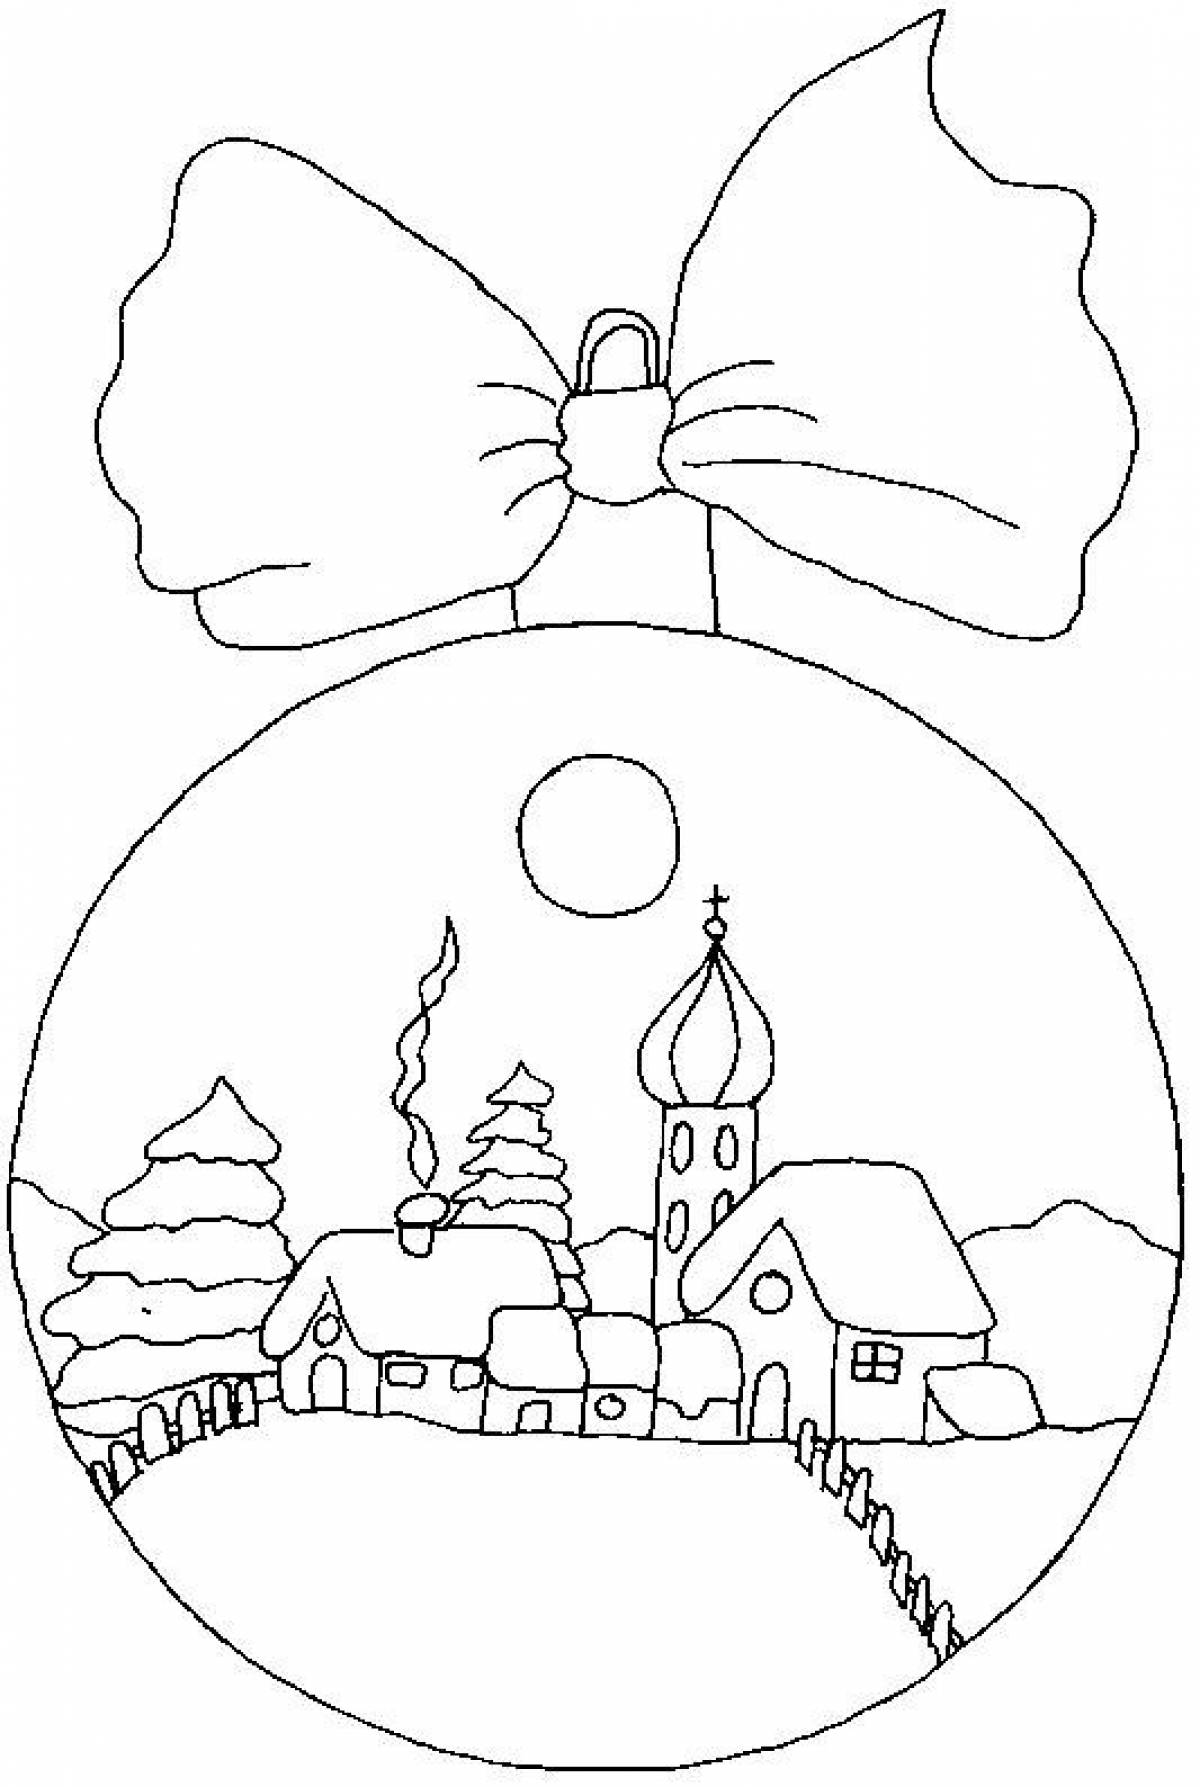 Ball with houses